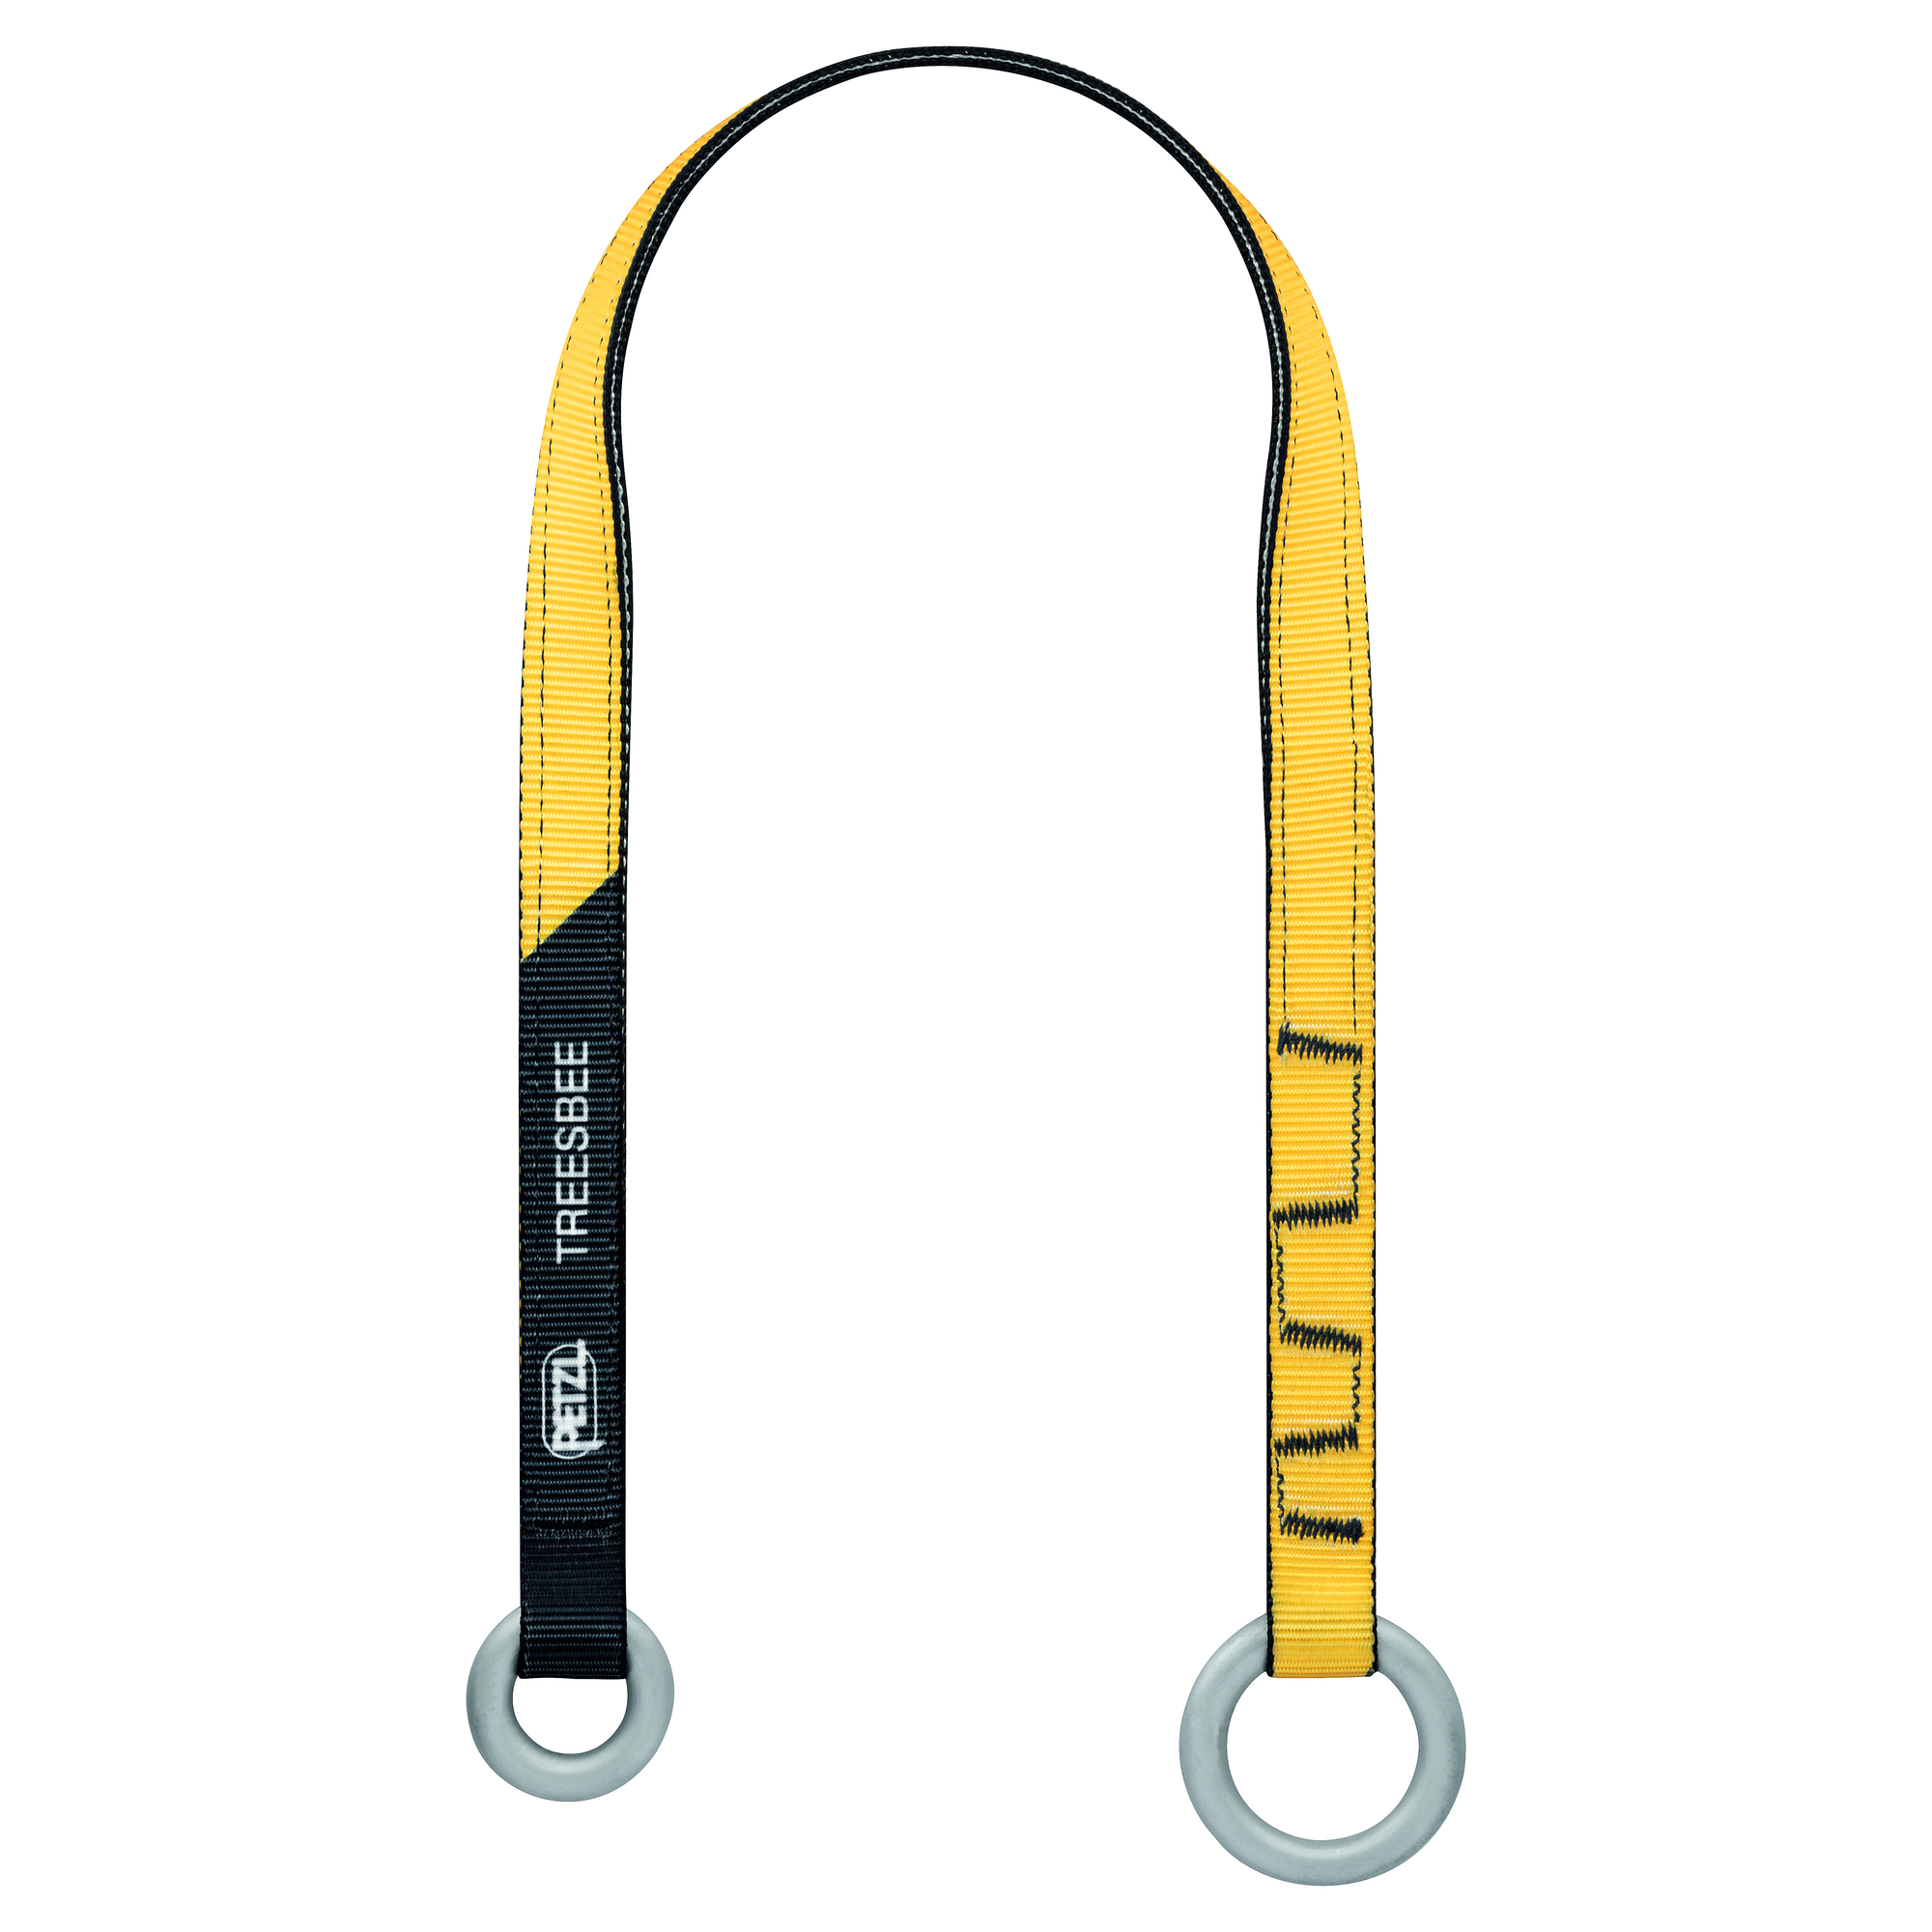 Petzl, TREESBEE 90cm Friction saver for tree care, Weight Capacity 5170.61 lb, Model G040AA00